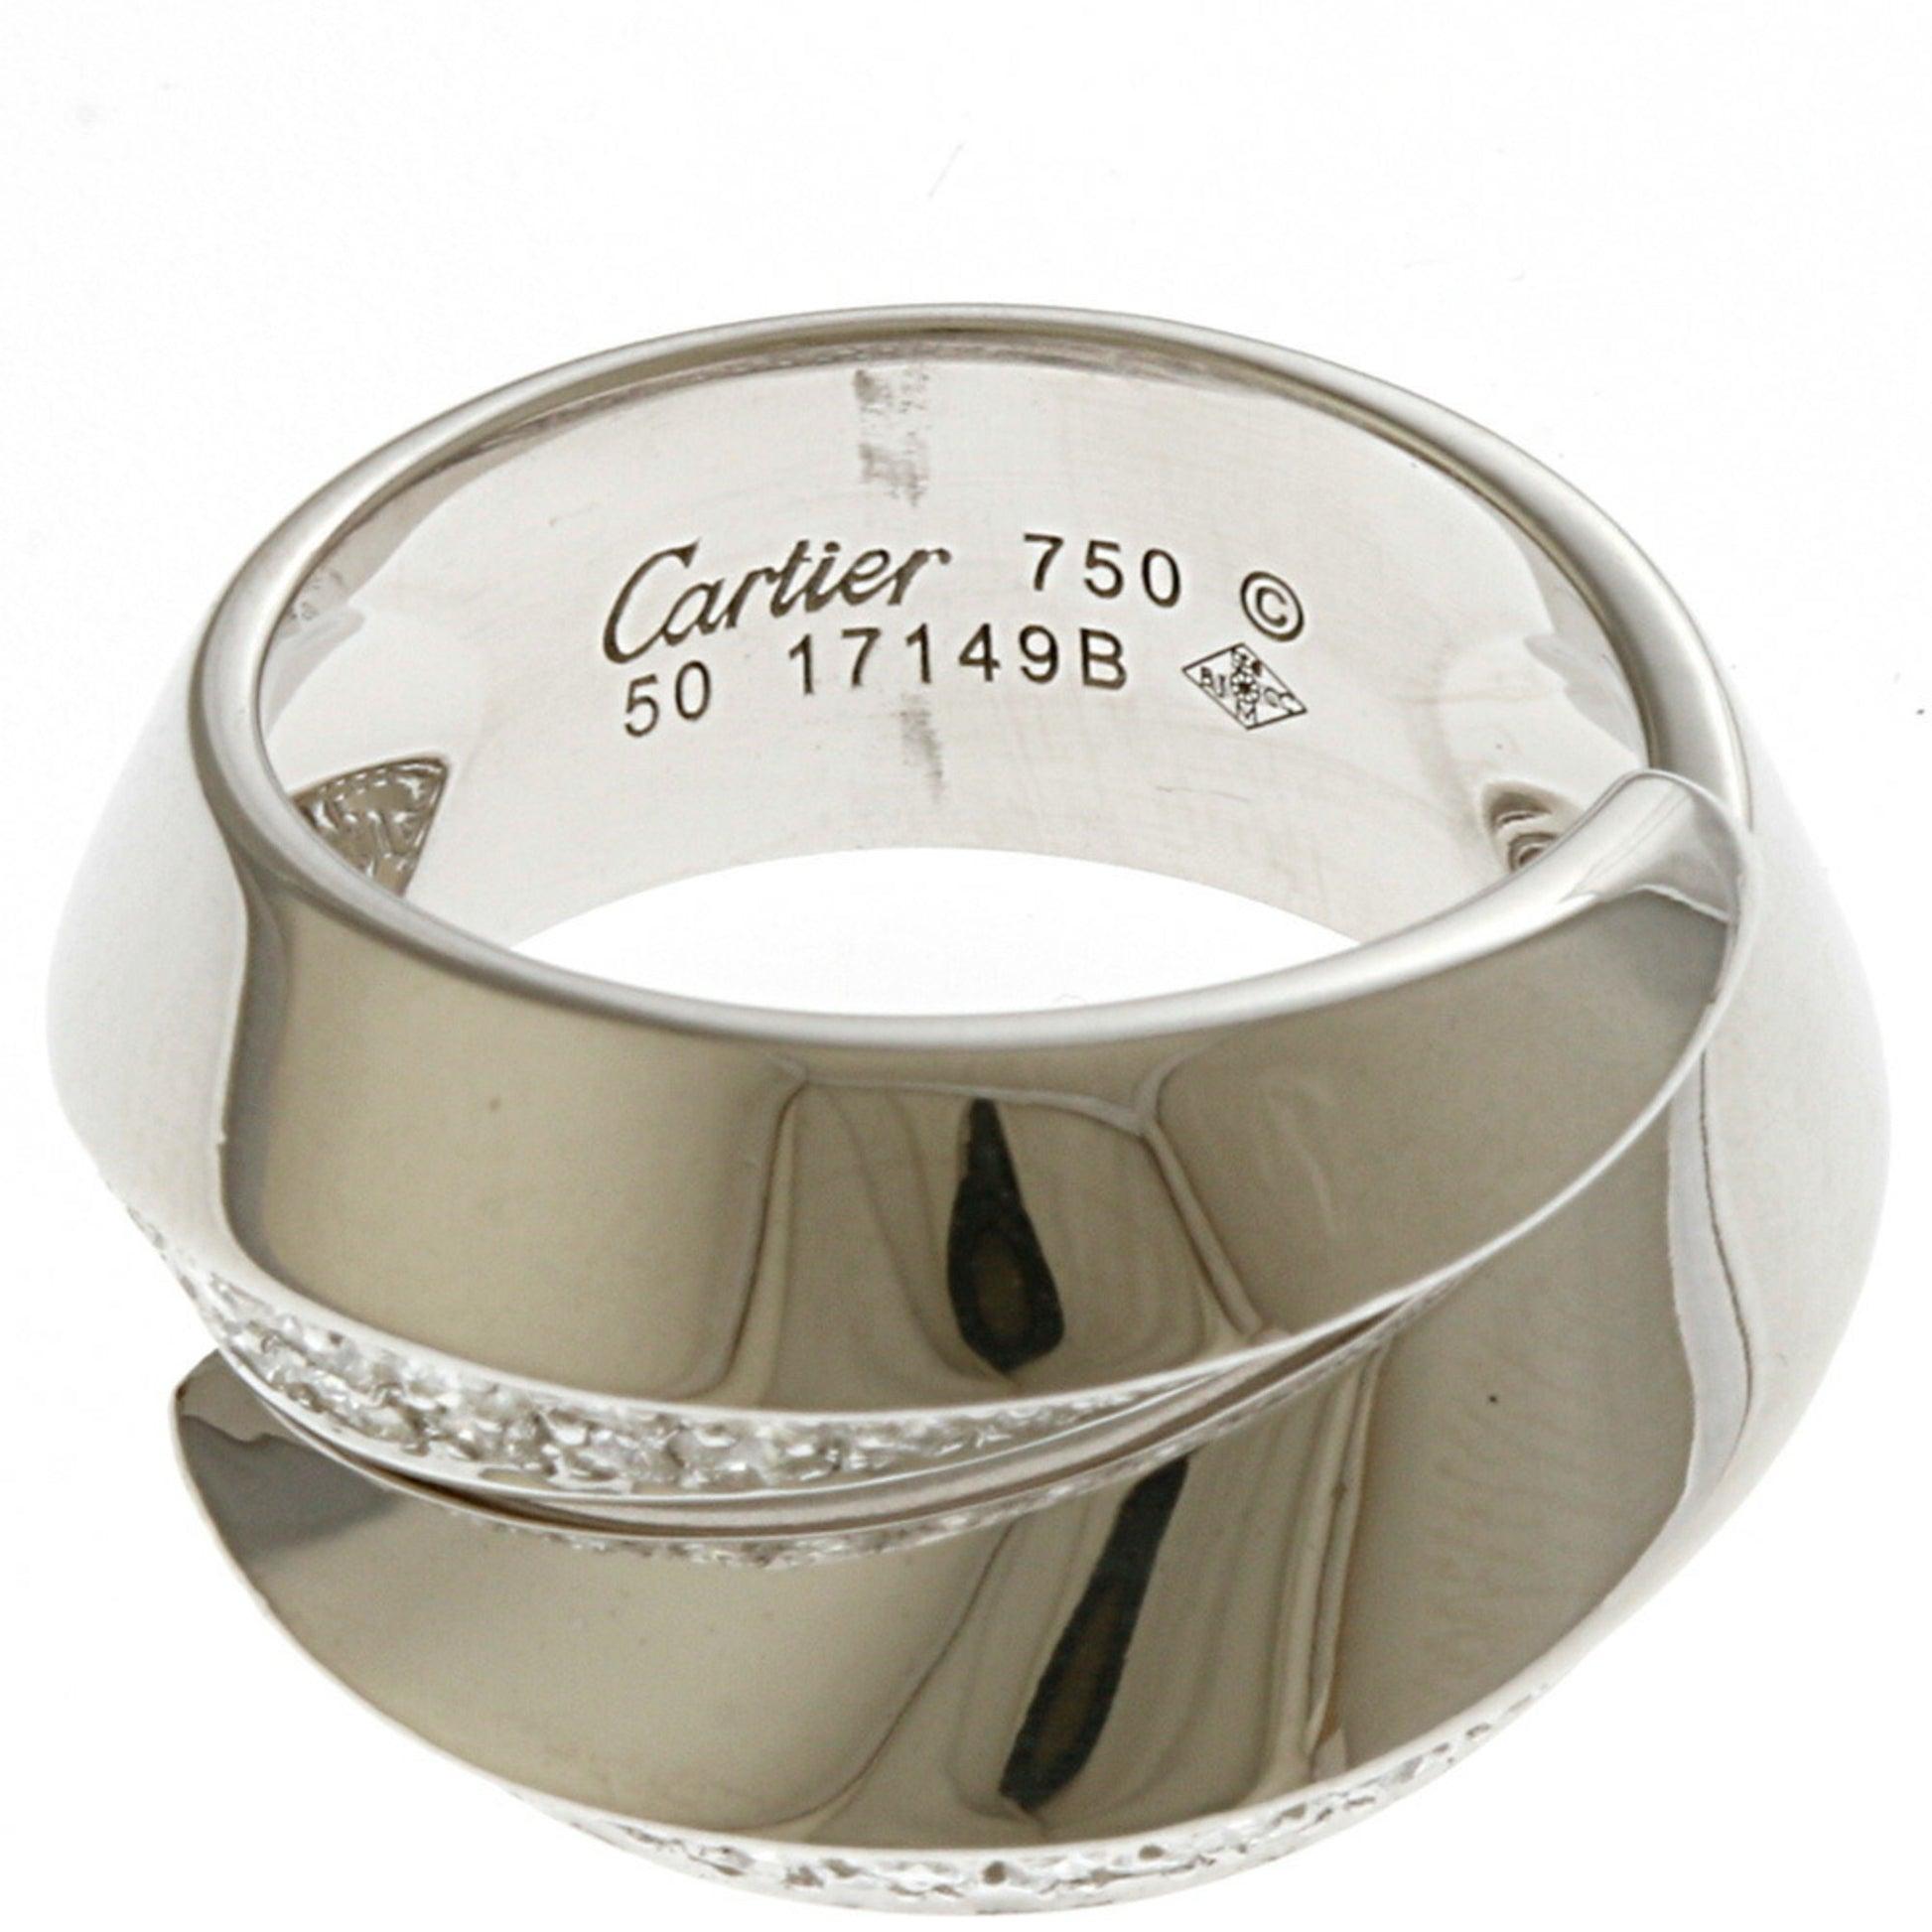 Cartier Panthere Griff Diamond Ring in 18K White Gold For Sale 2